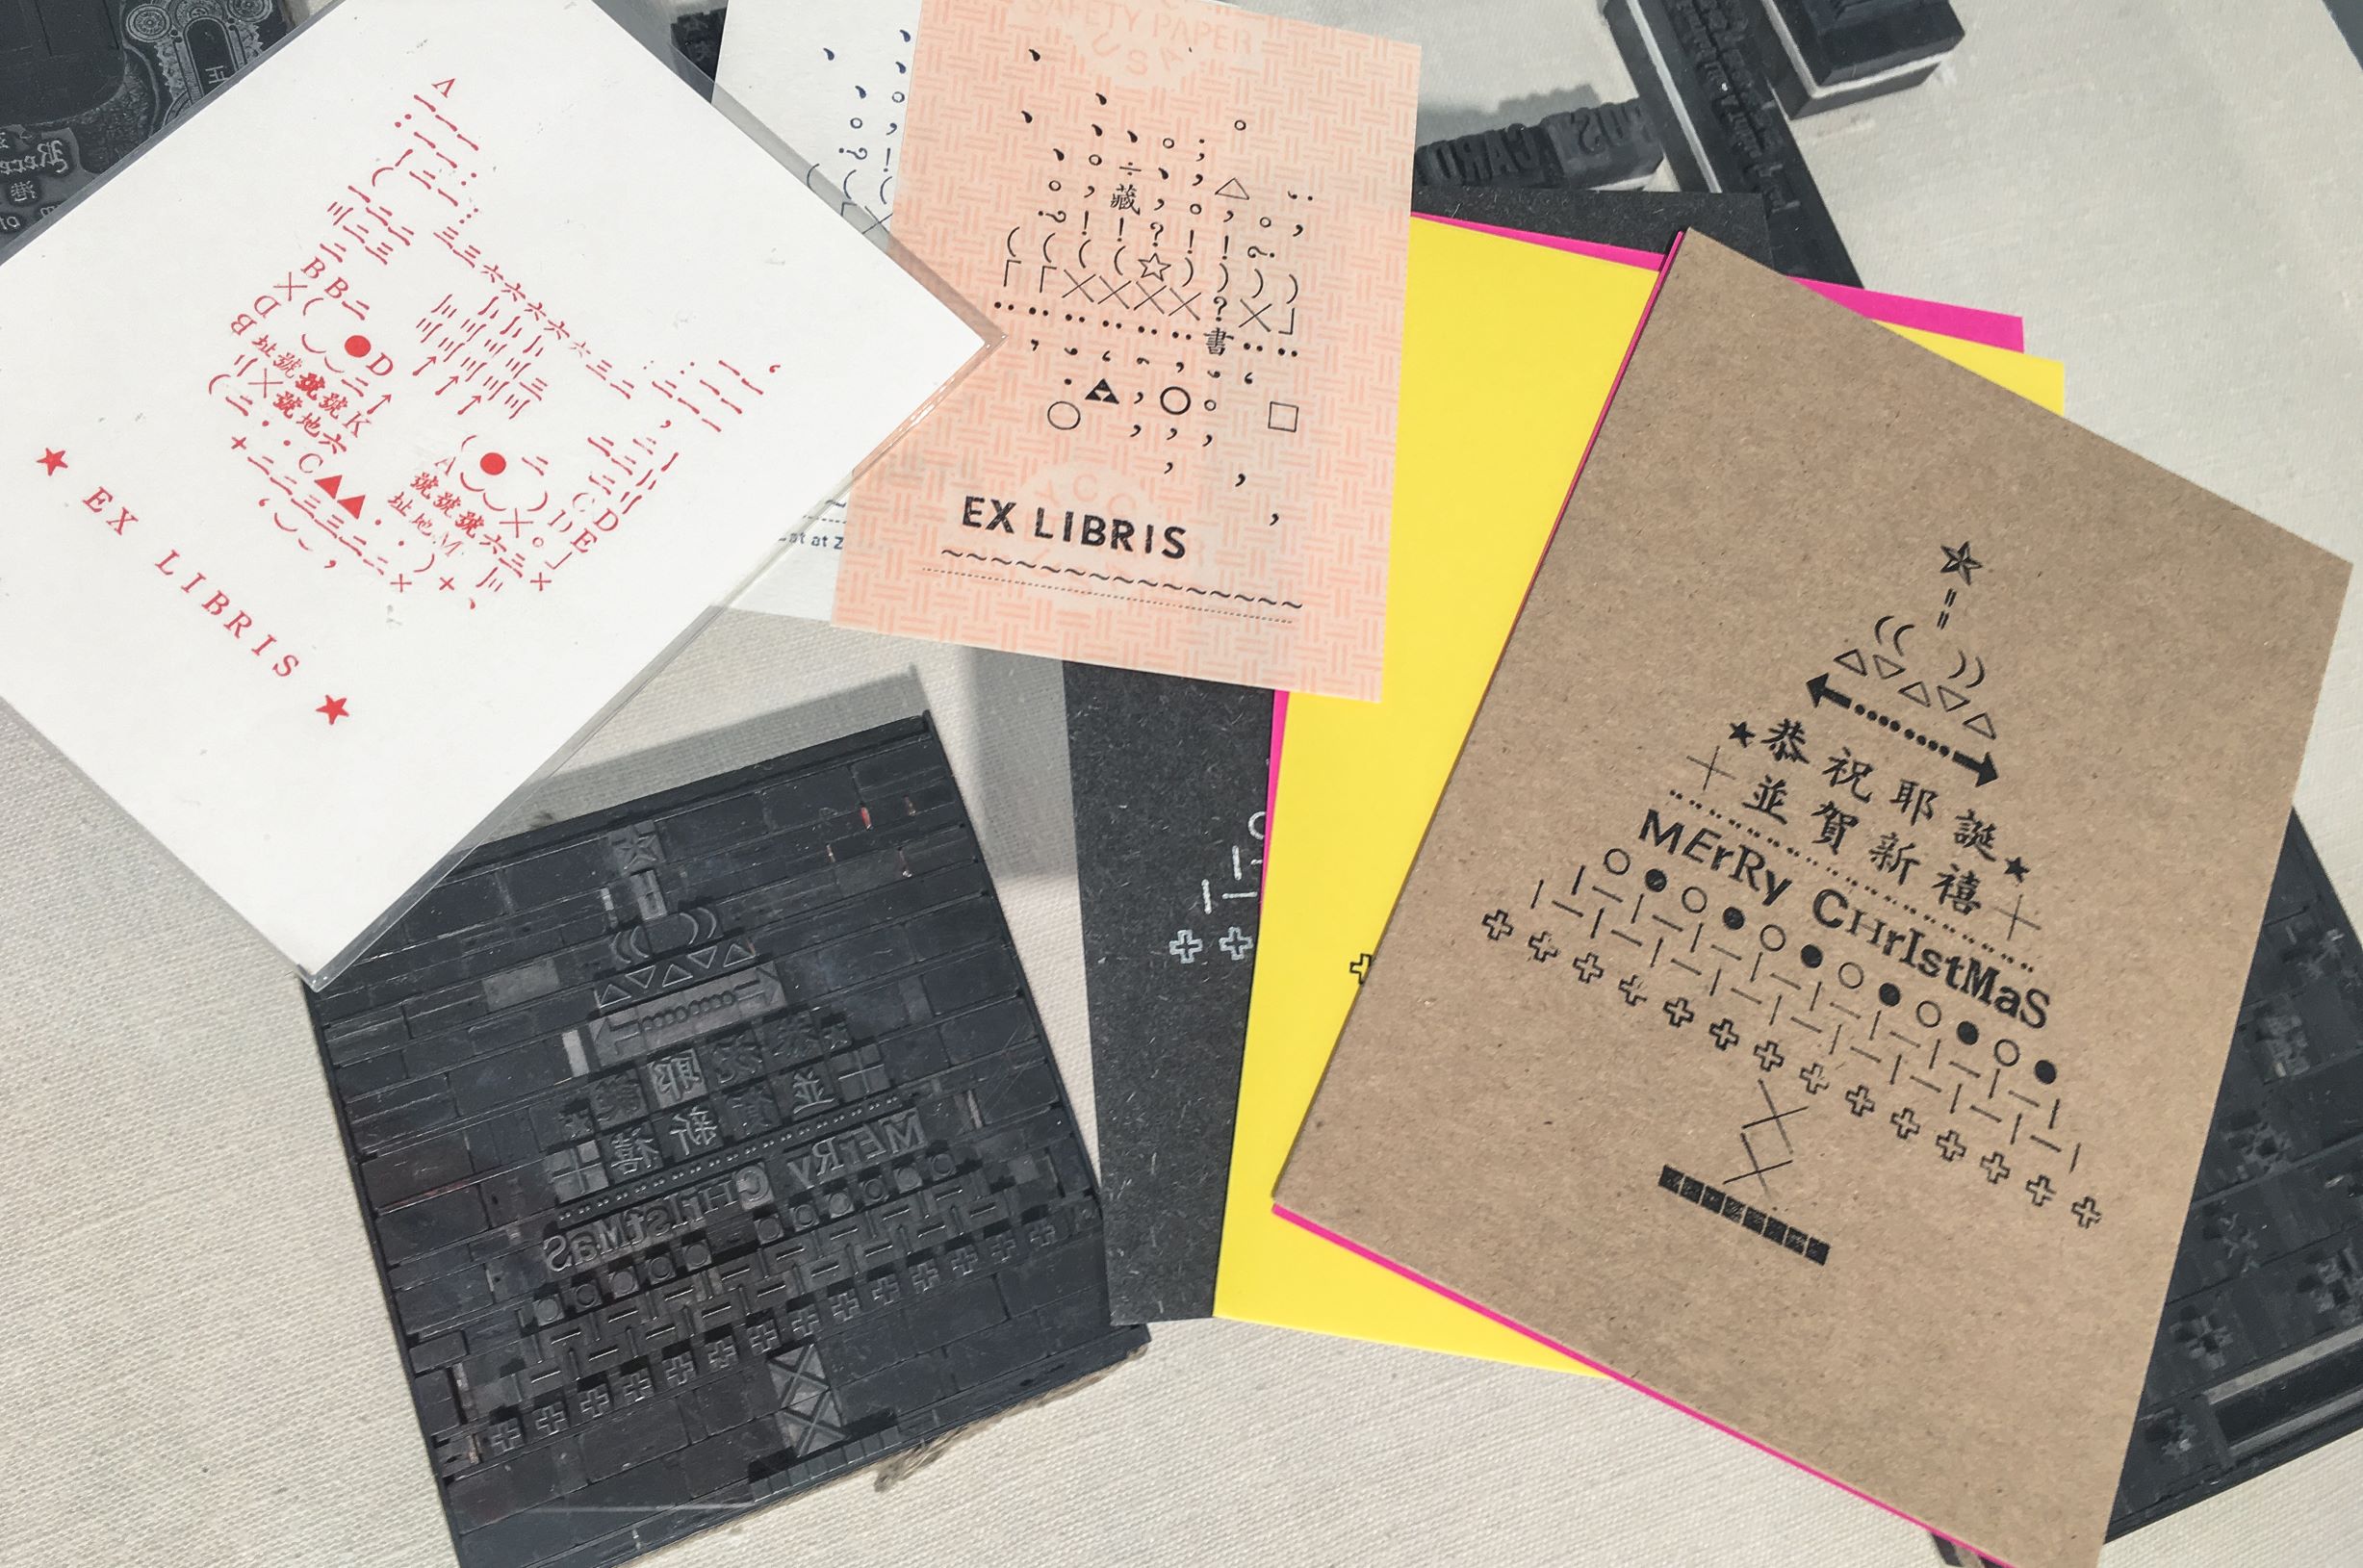 Typesetting for letterpress printing can be a very demanding process. Each character, as well as the word and line spacing, must be laid out with lead blocks of type and spacing materials, requiring a high degree of precision. 